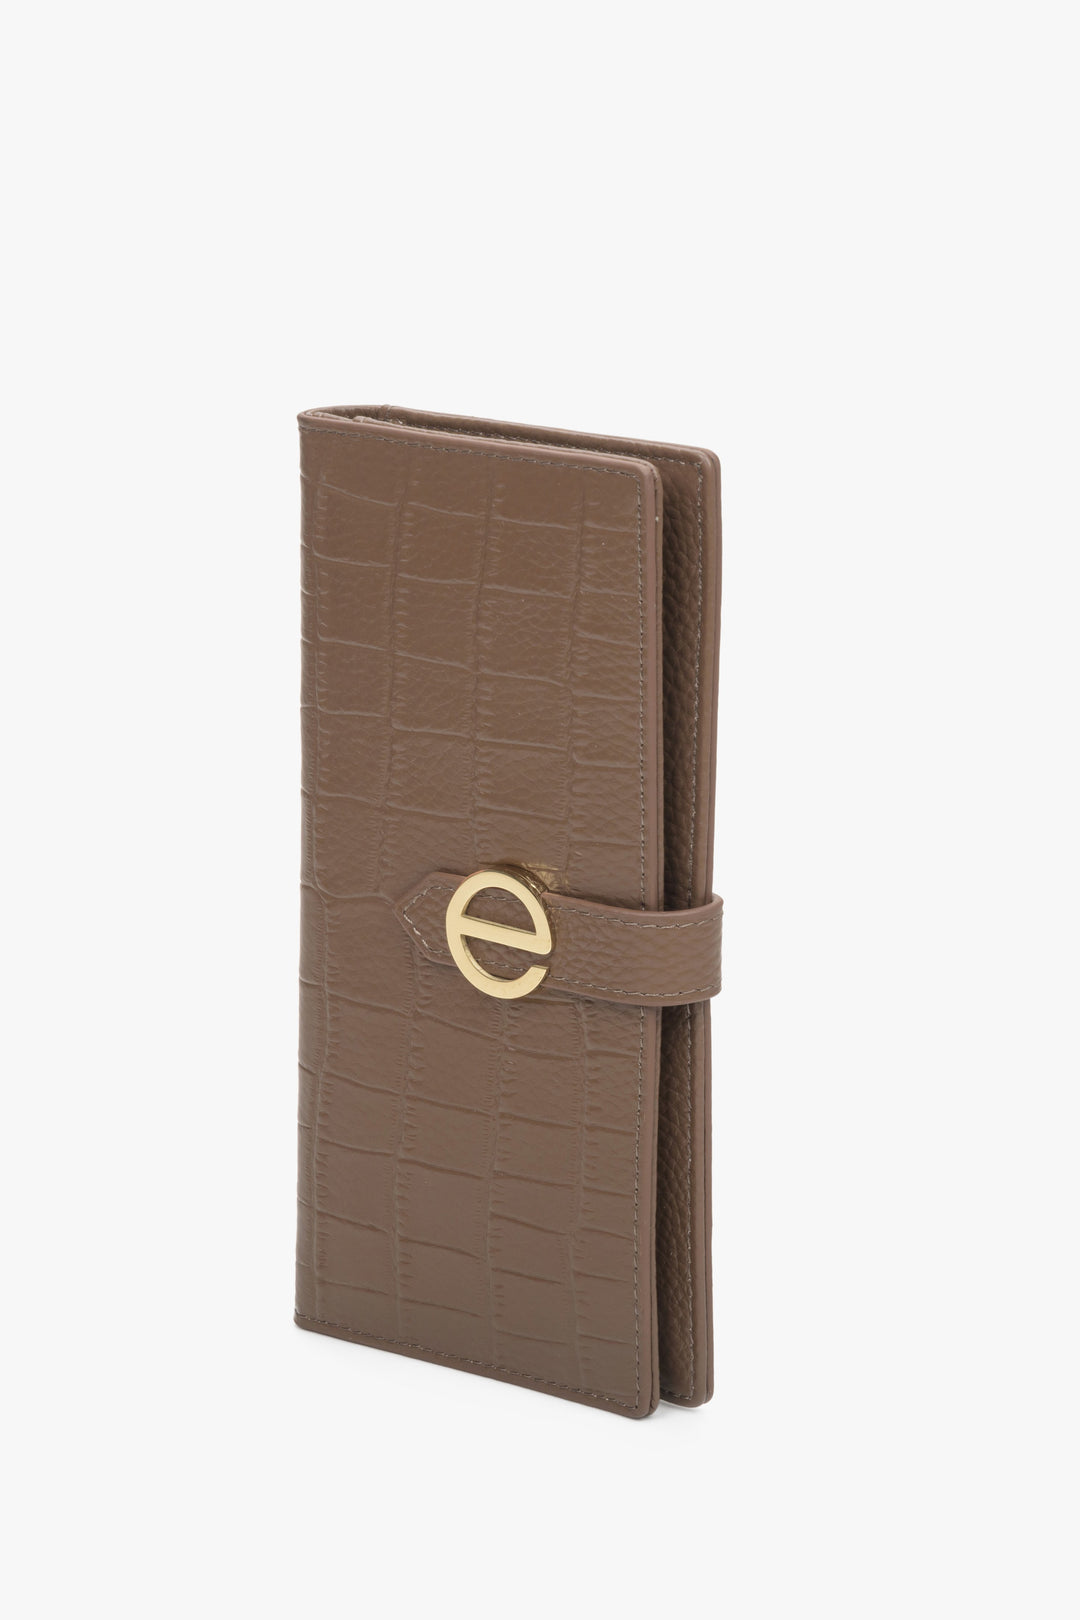 Large brown women's wallet with gold fittings by Estro.